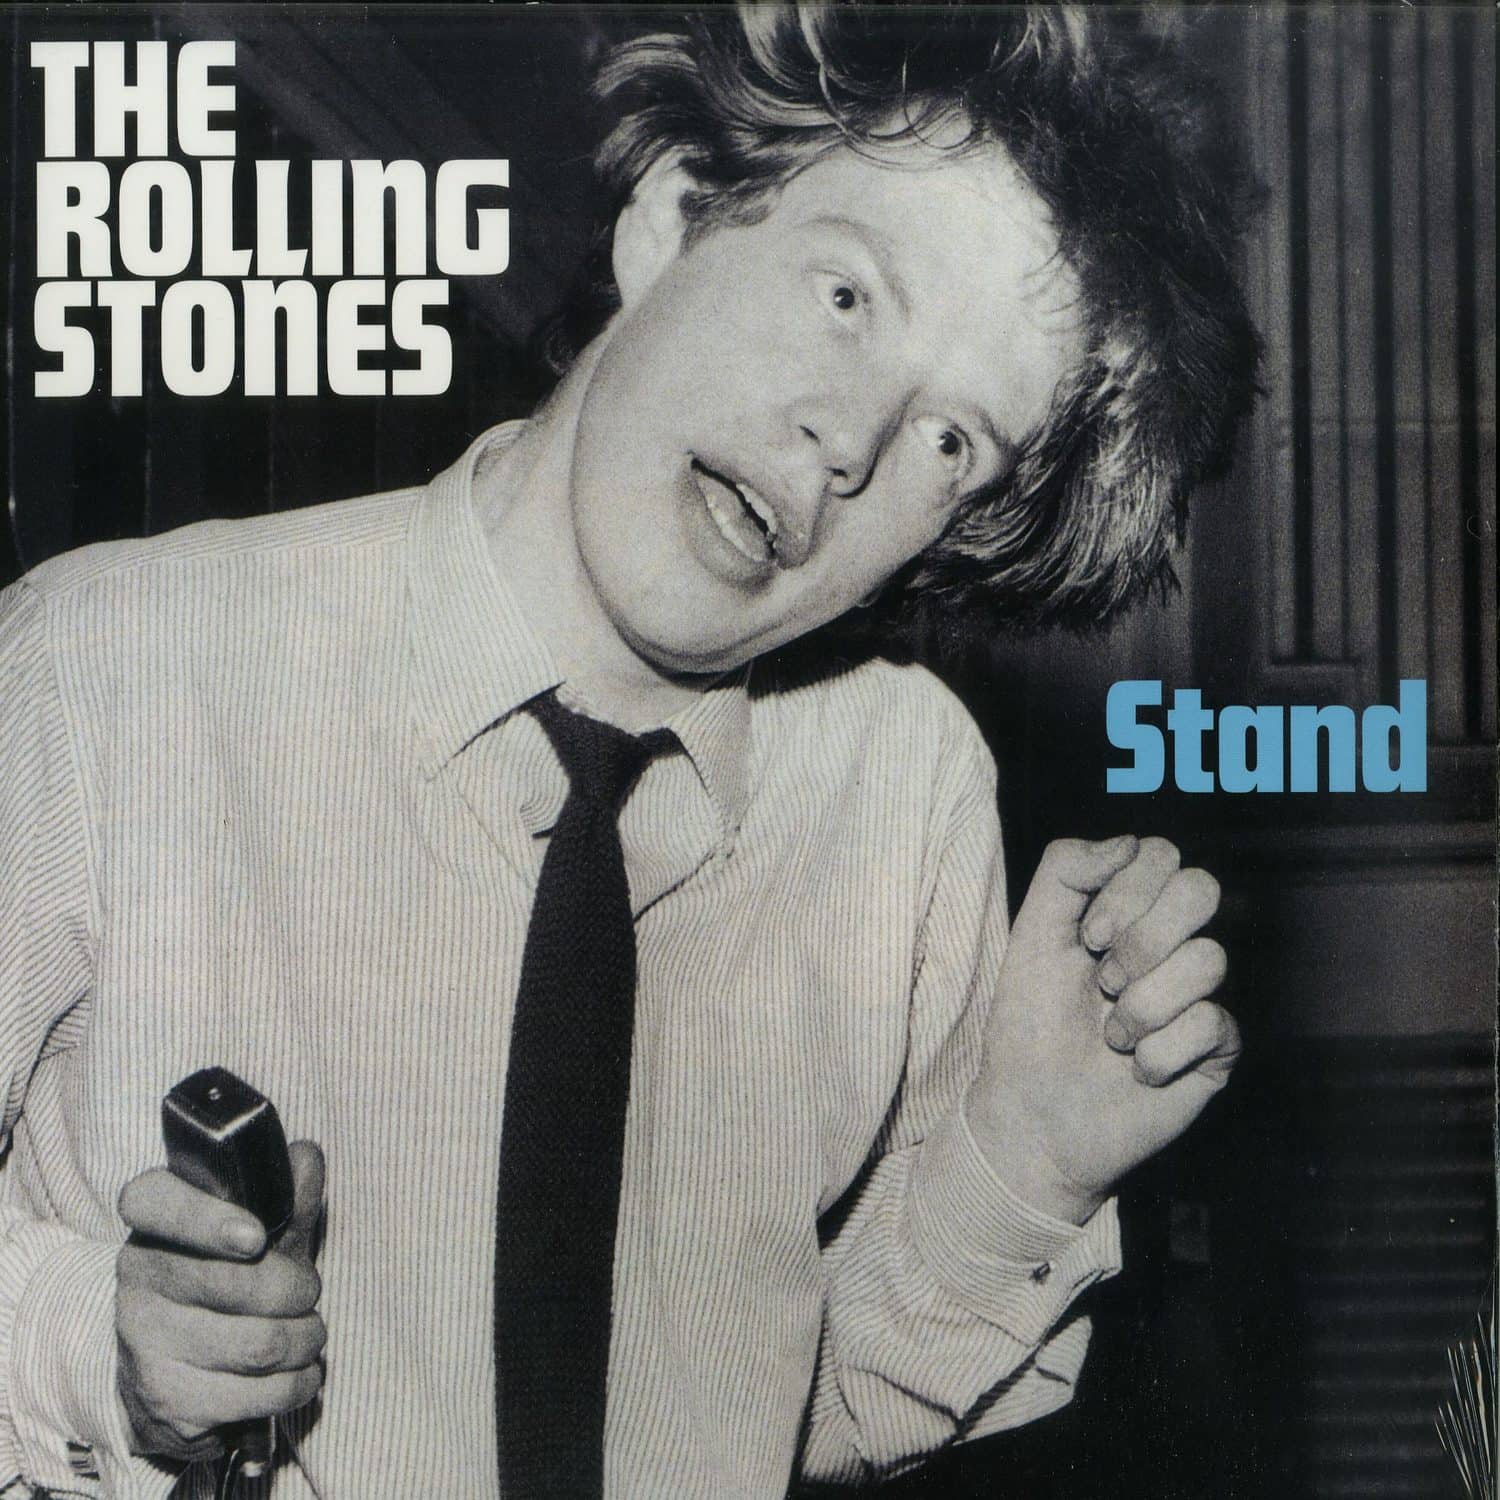 The Rolling Stones - STAND 